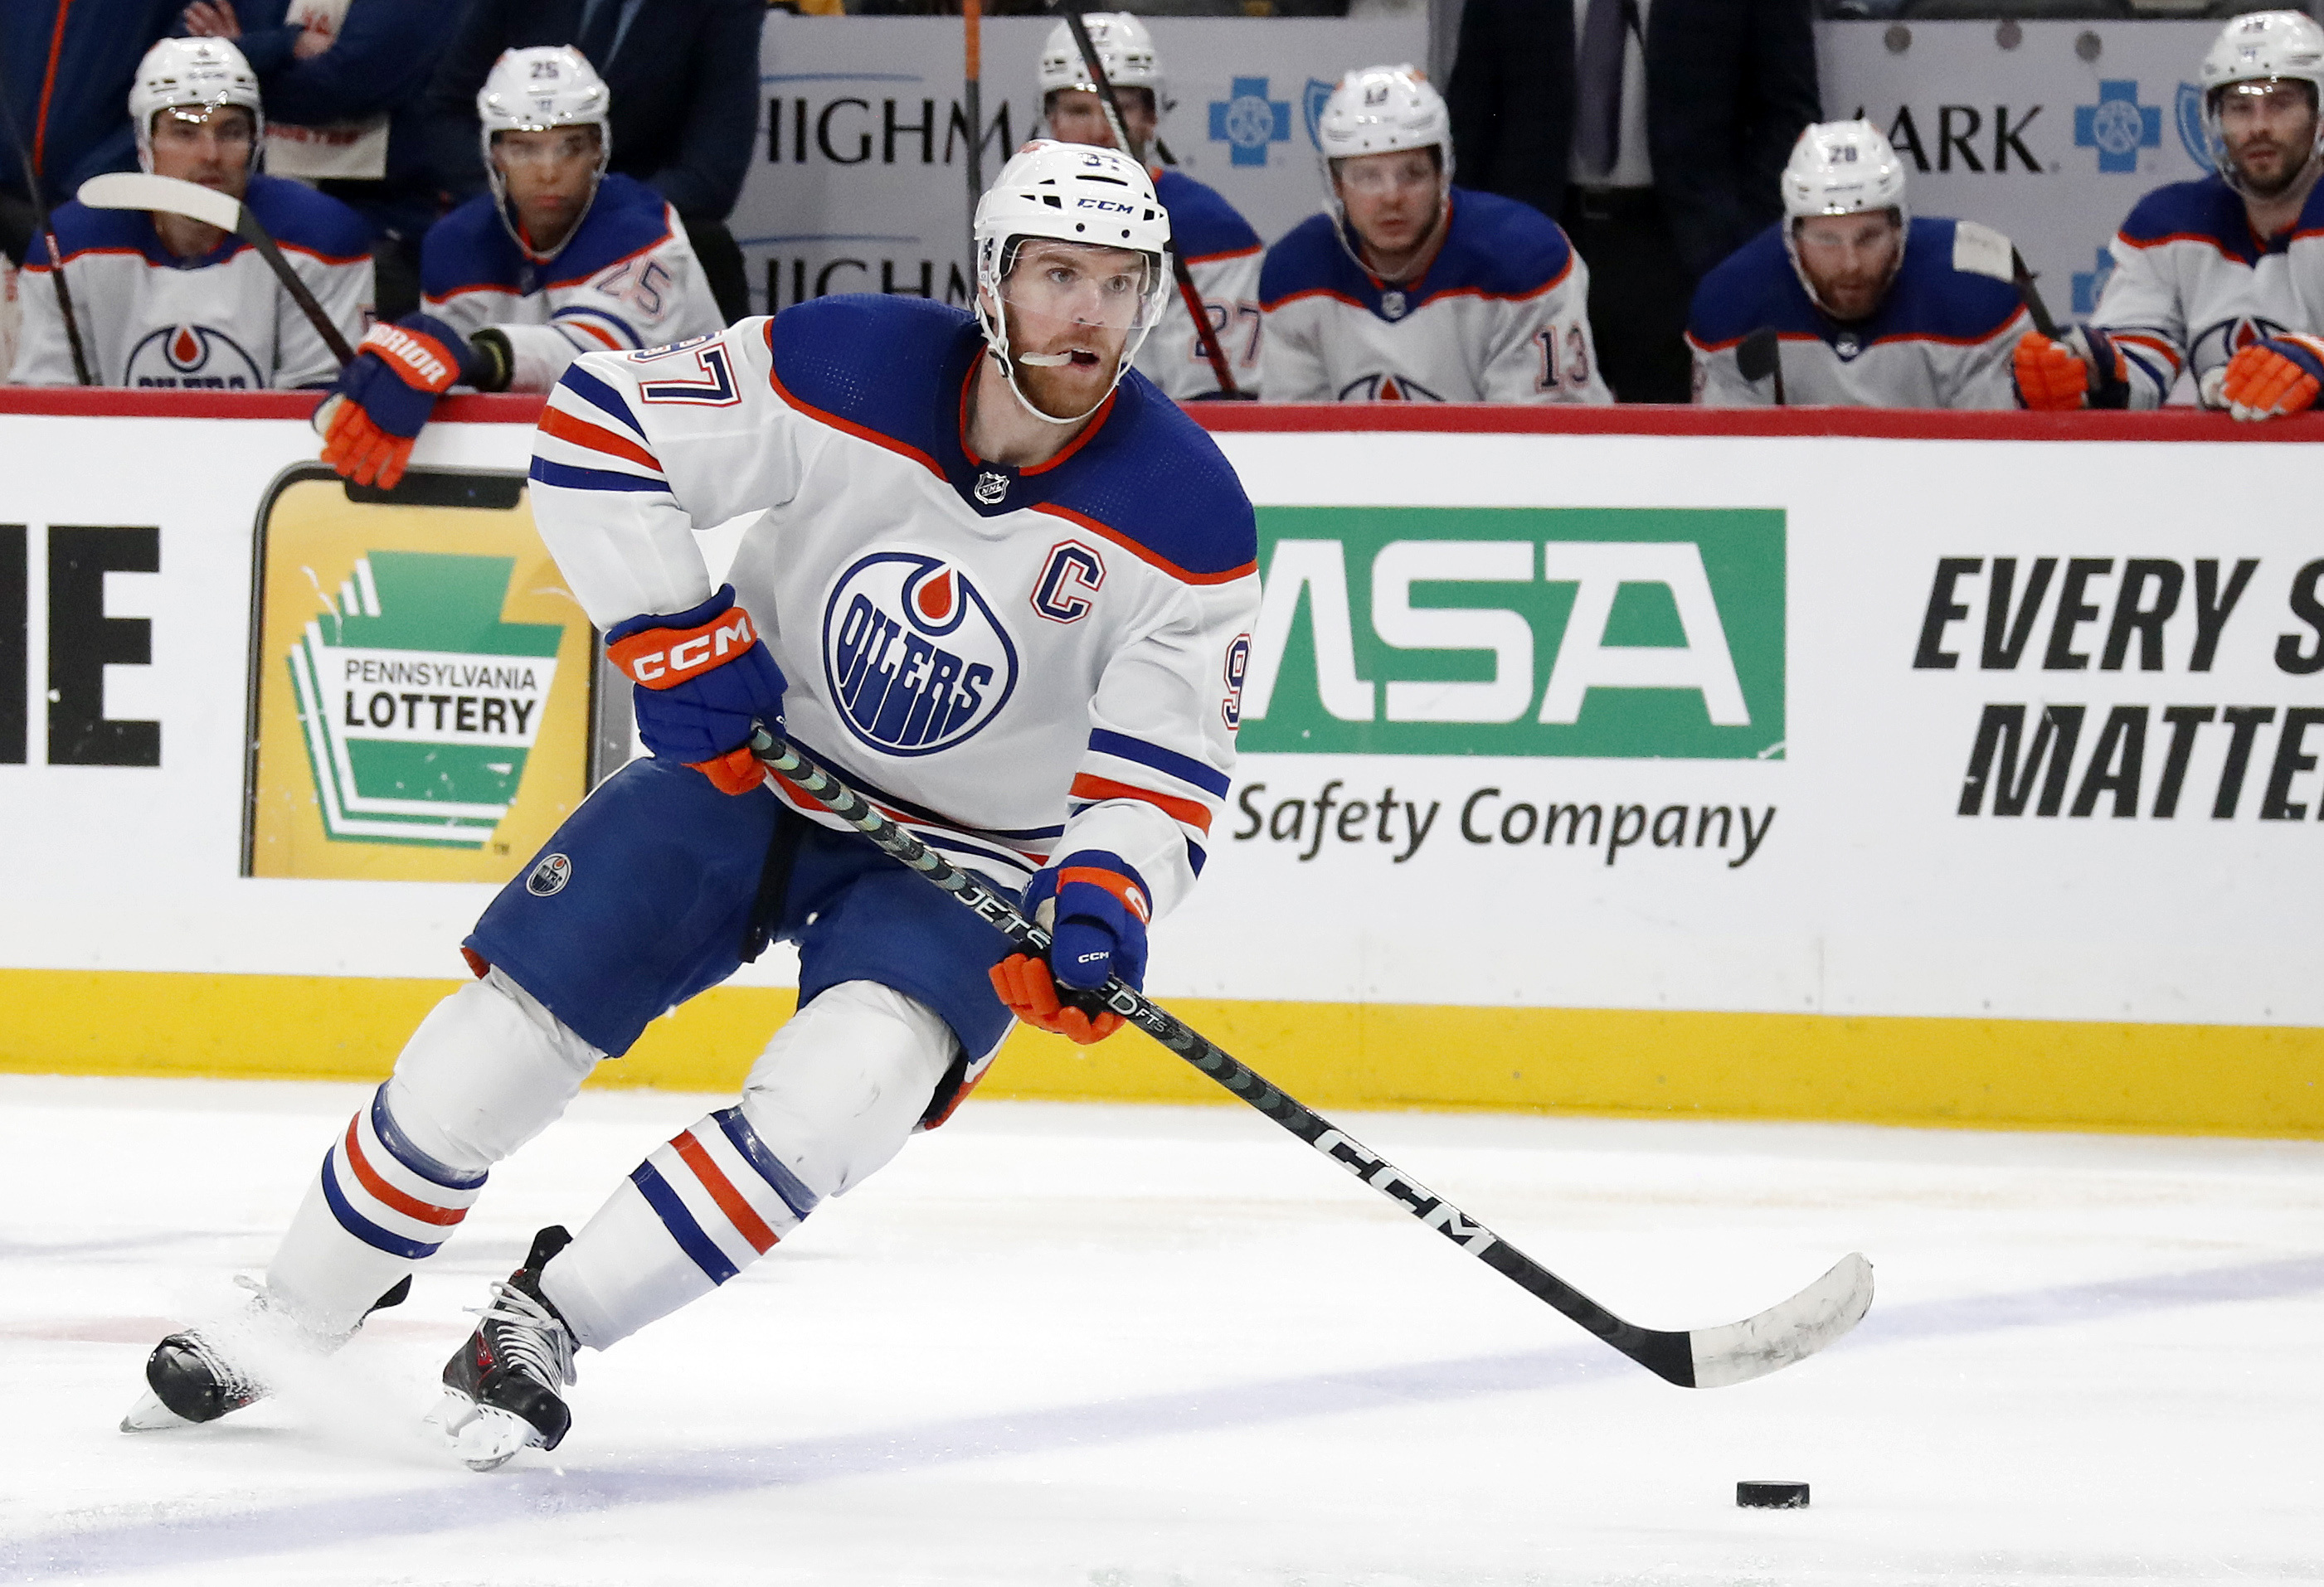 Connor McDavid, Oilers blank Penguins in physical game | Reuters